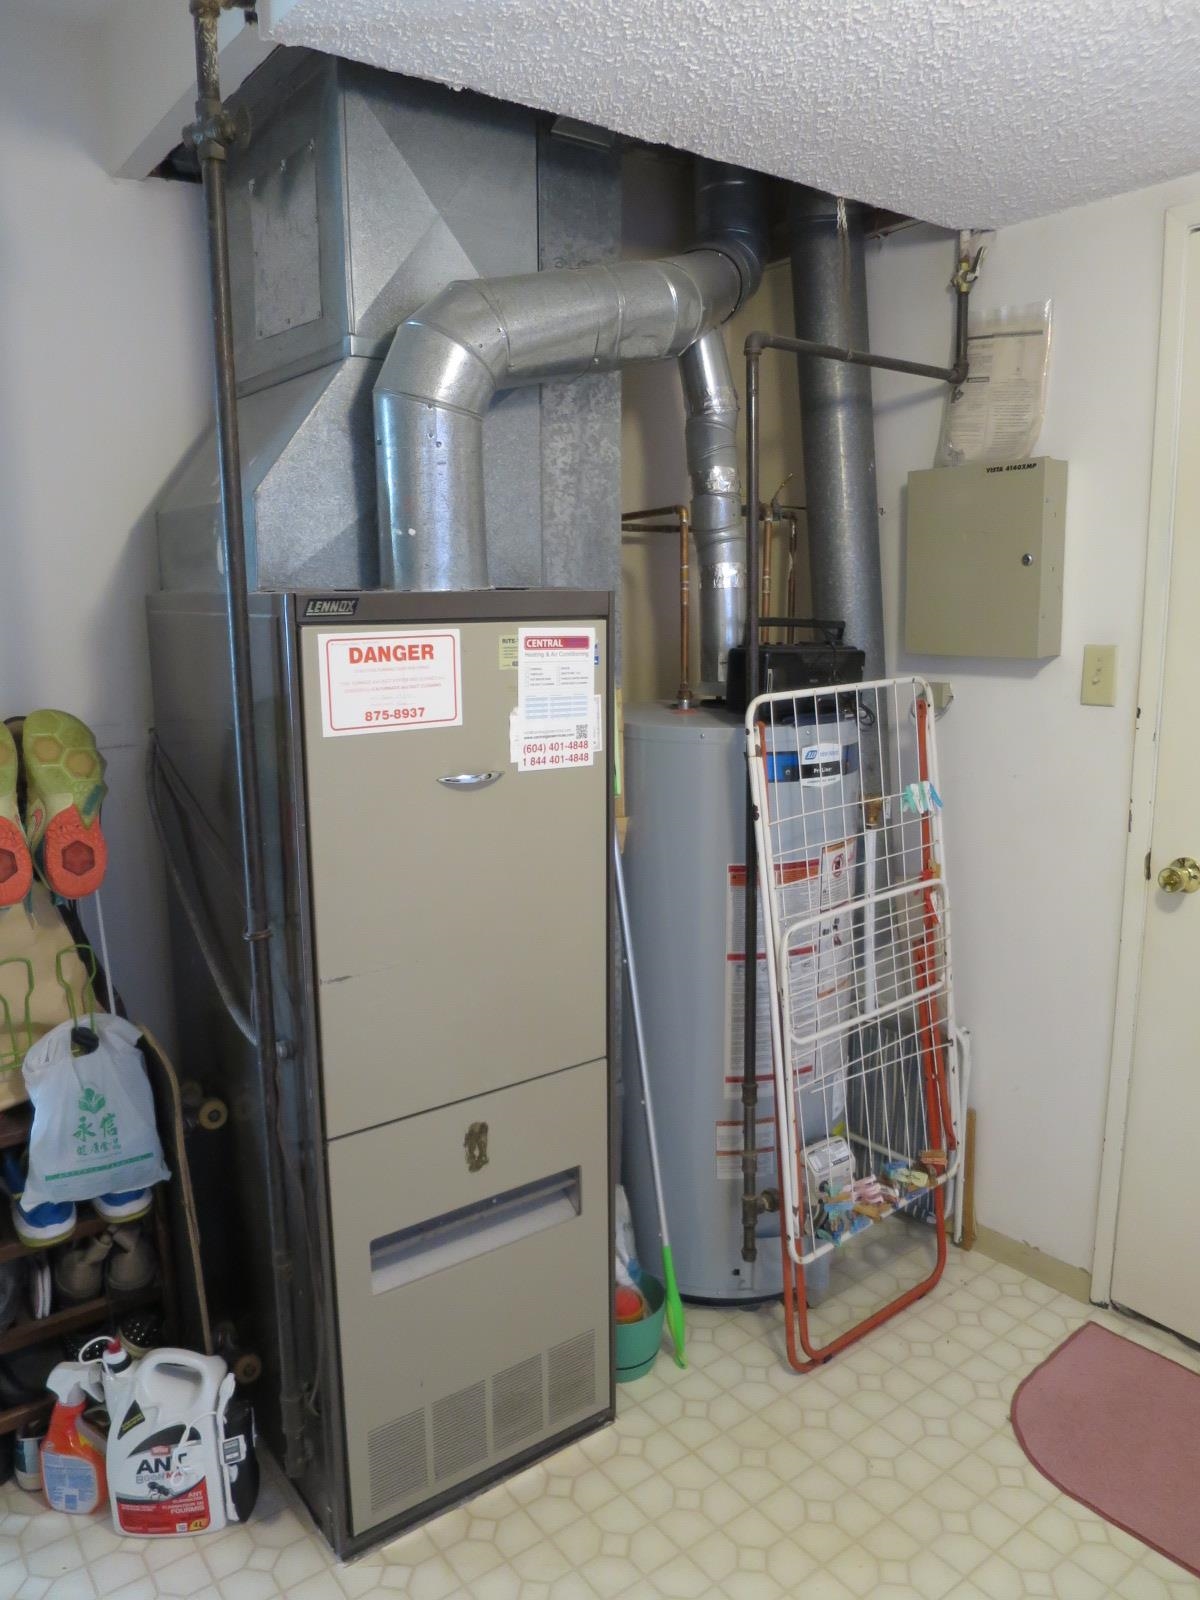 Furnace and Water Heater in Laundry Room